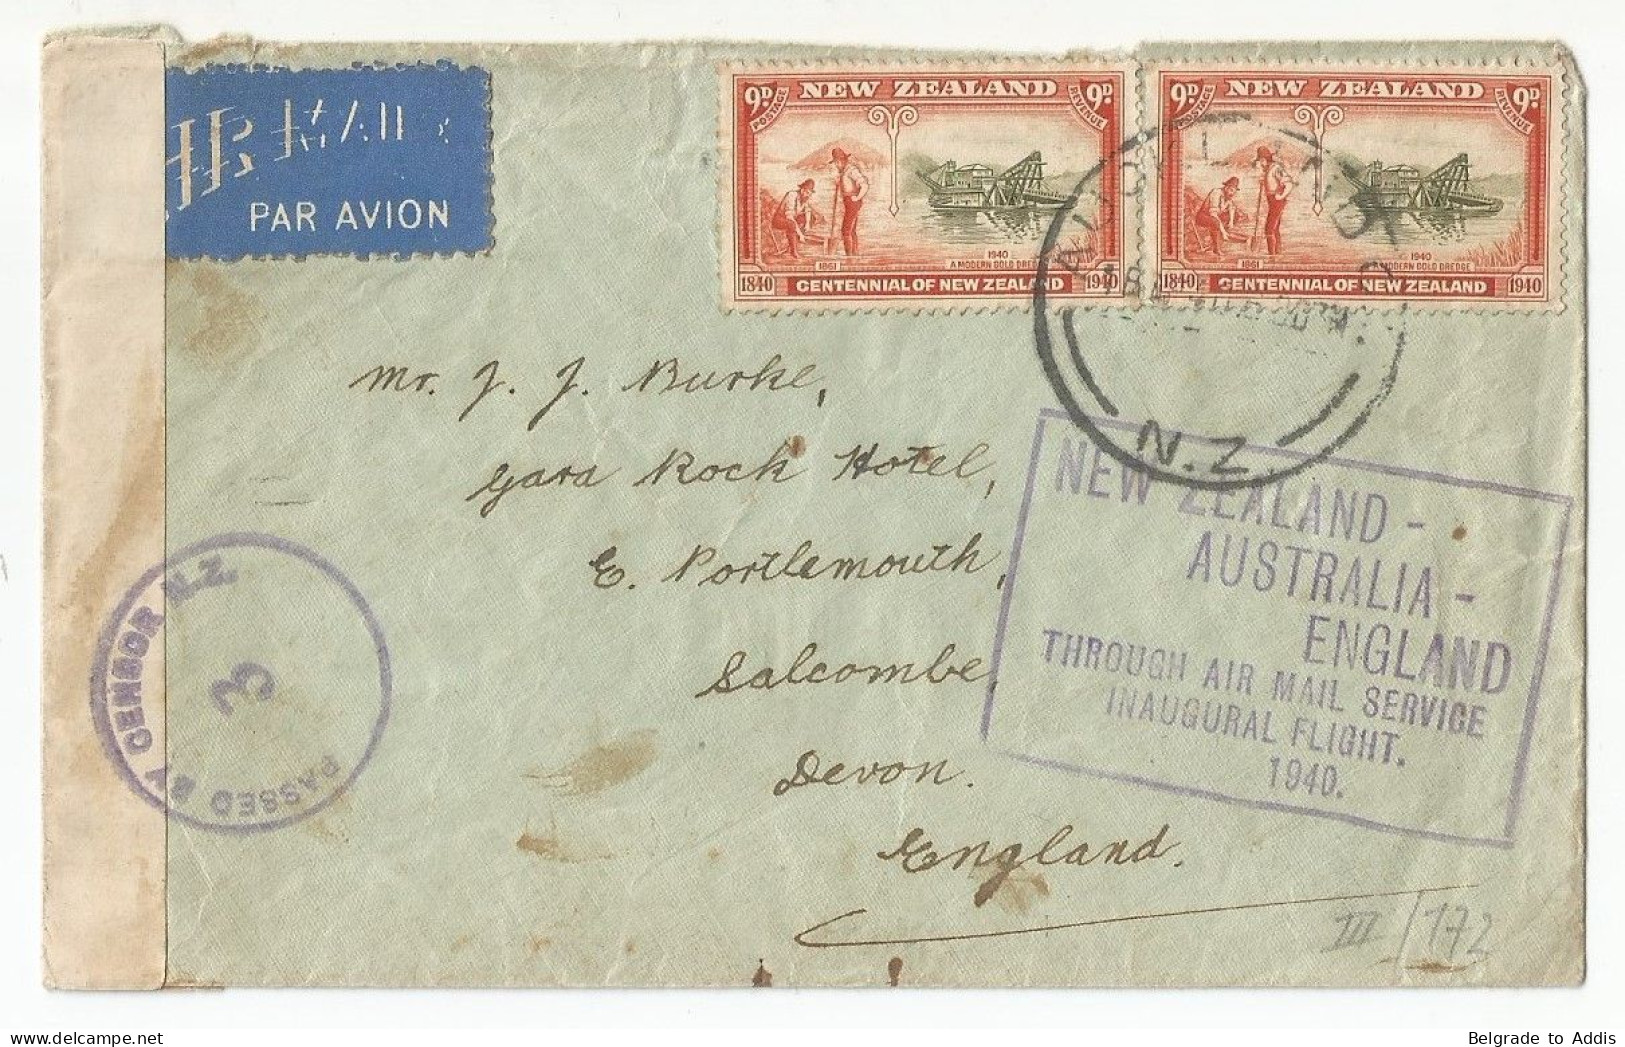 New Zealand Australia England  Inaugural Flight Air Mail Censored Cover 1940 Great Britain - Airmail